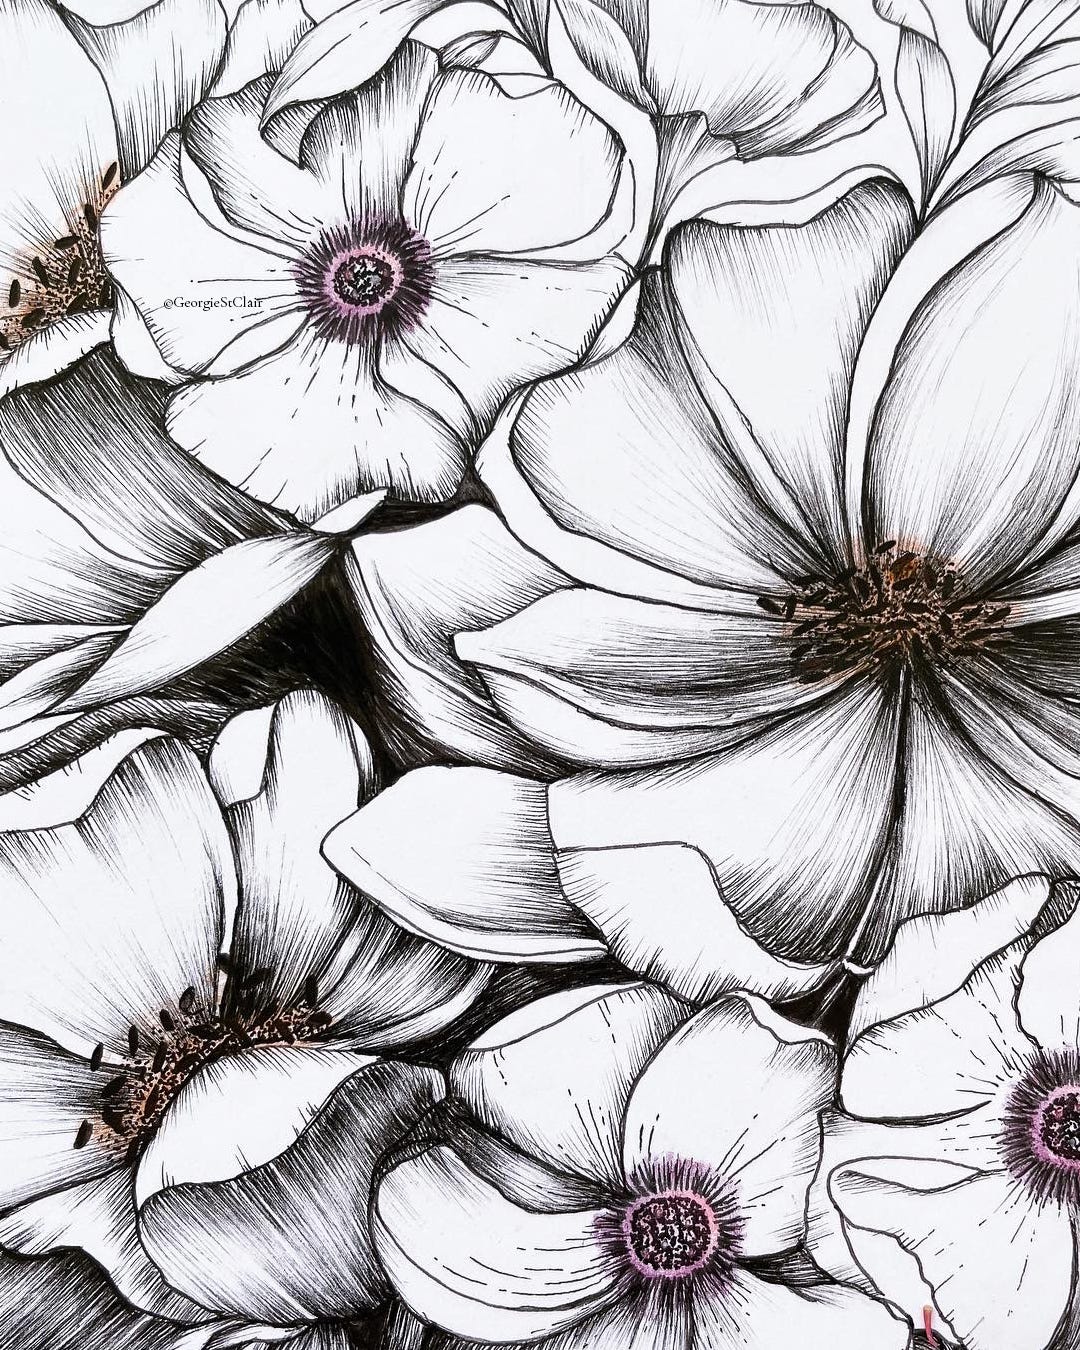 Floral details made using fineliner drawings pens and polychromos pencils by Georgie St Clair